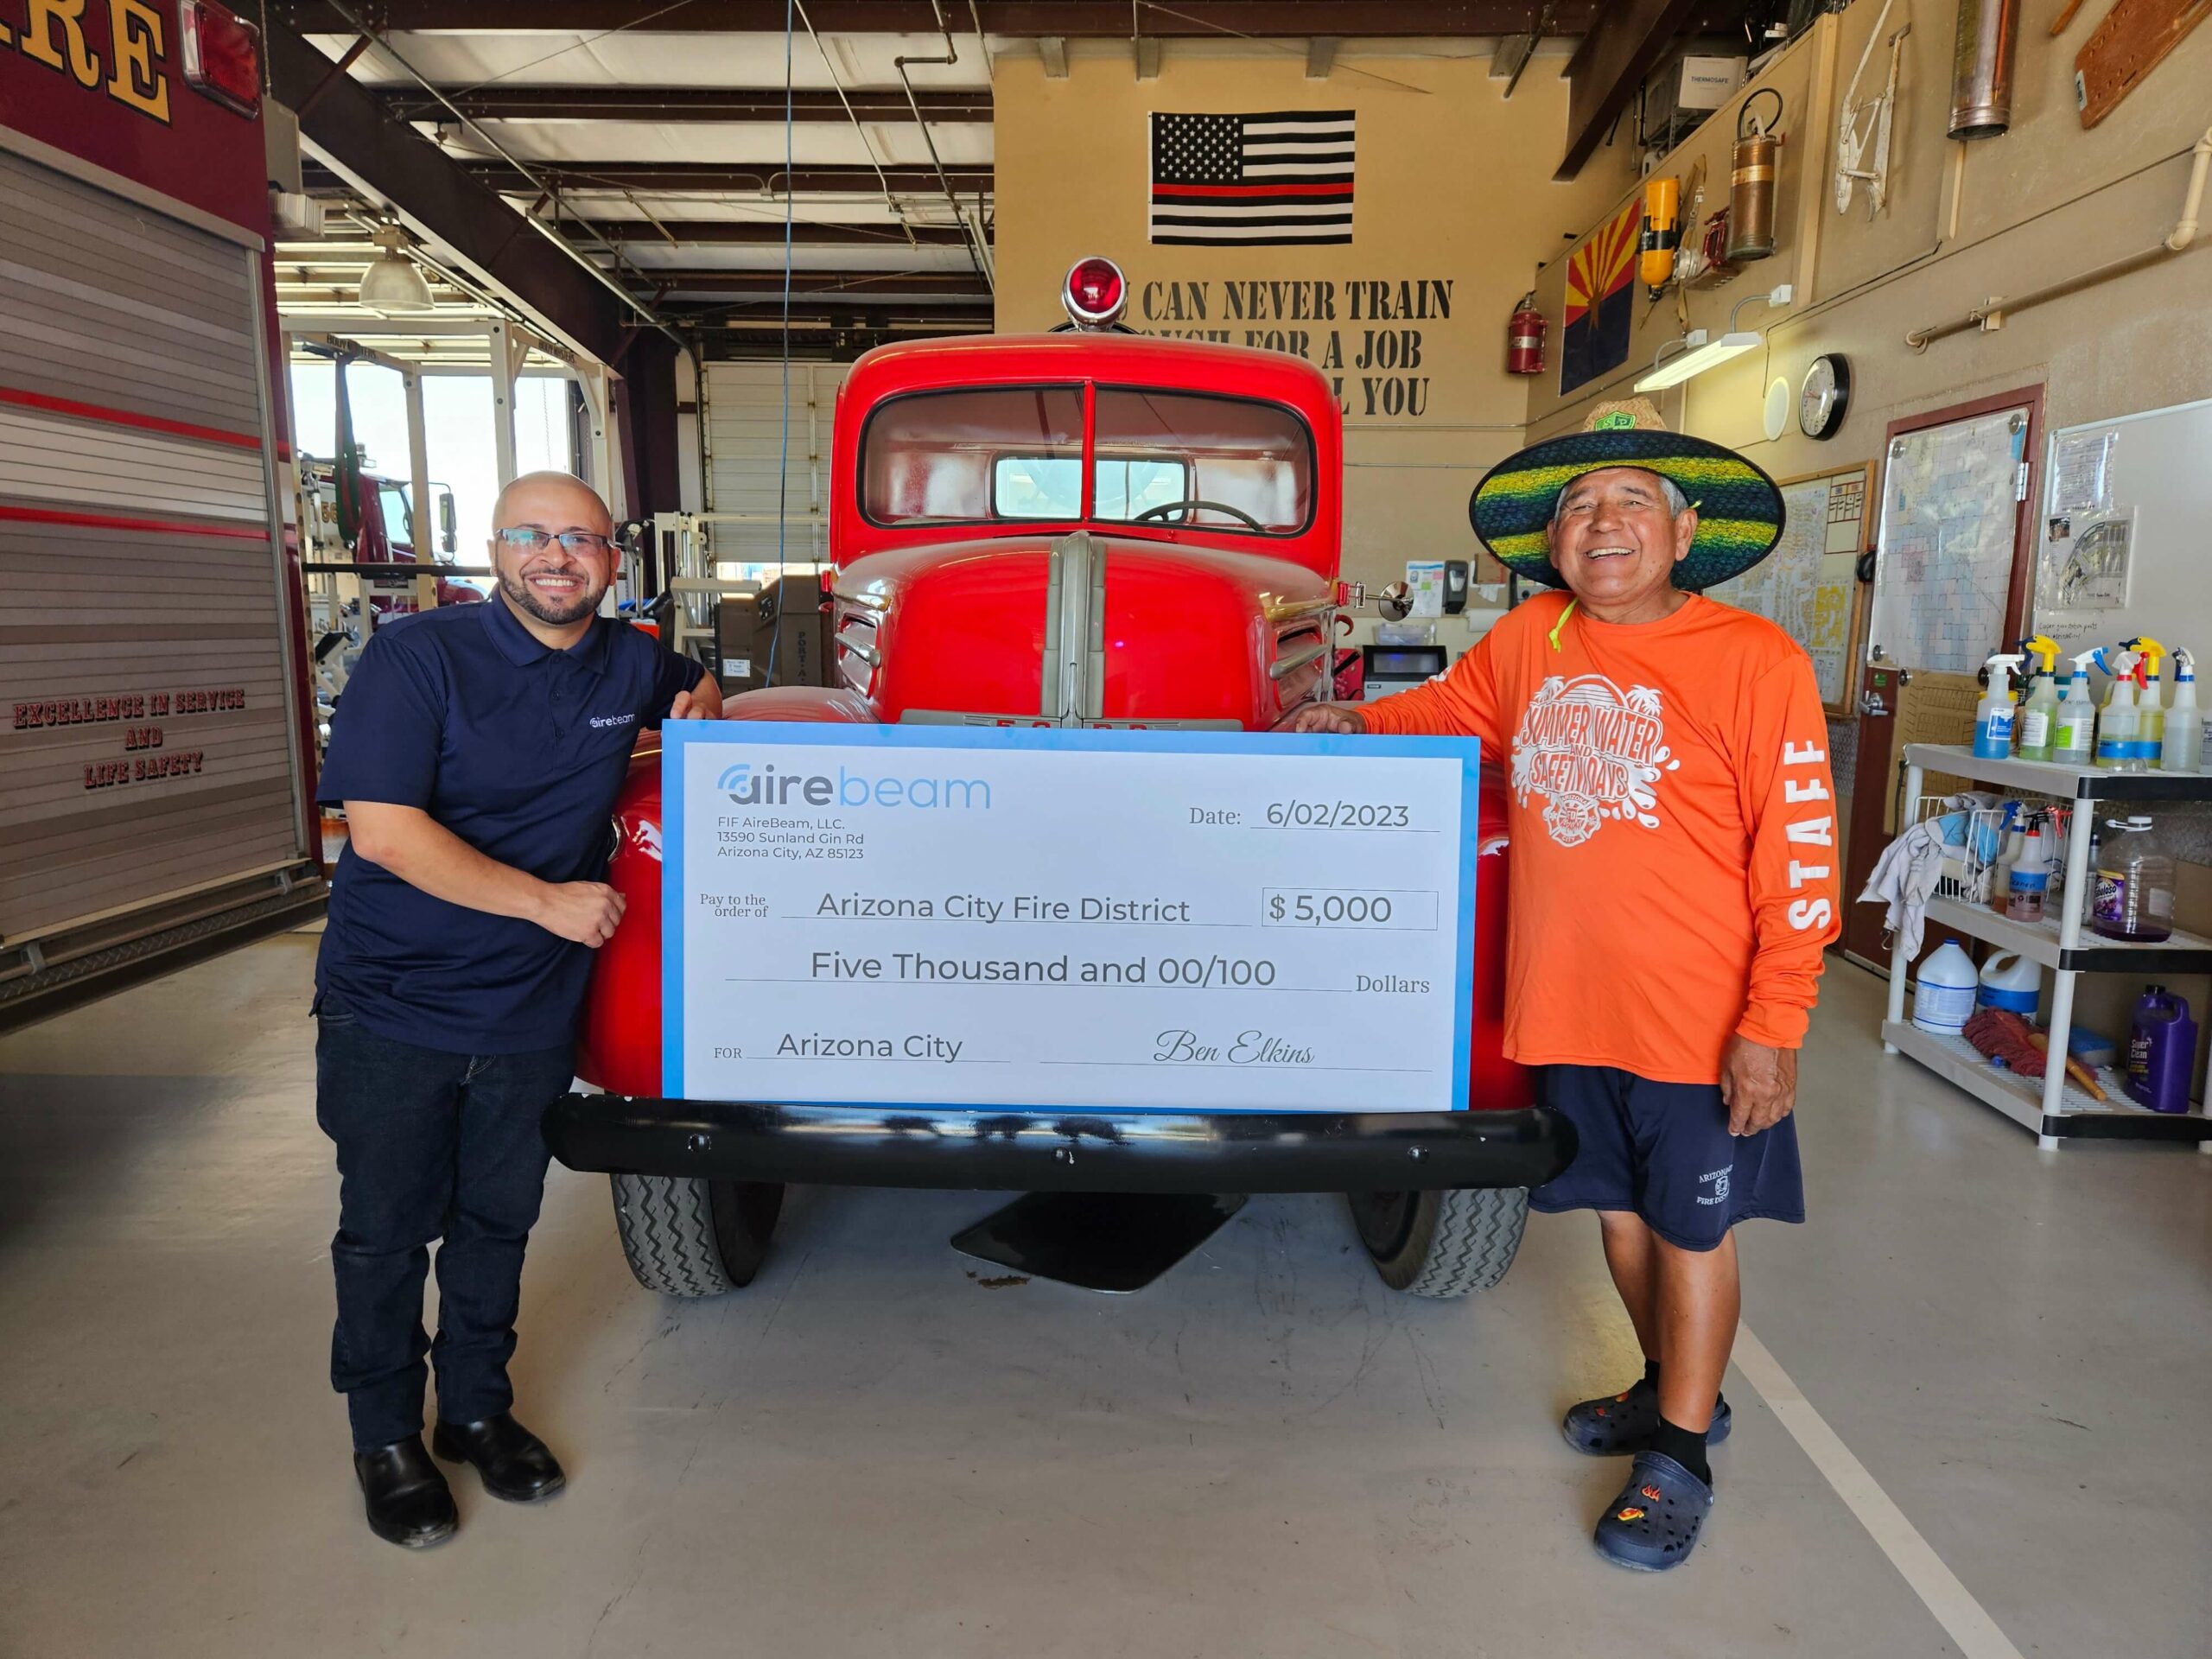 Zavier Hafiz AireBeam’s Director of Operations (left) and Ernie Lopez Captain of Arizona City Fire District (right).